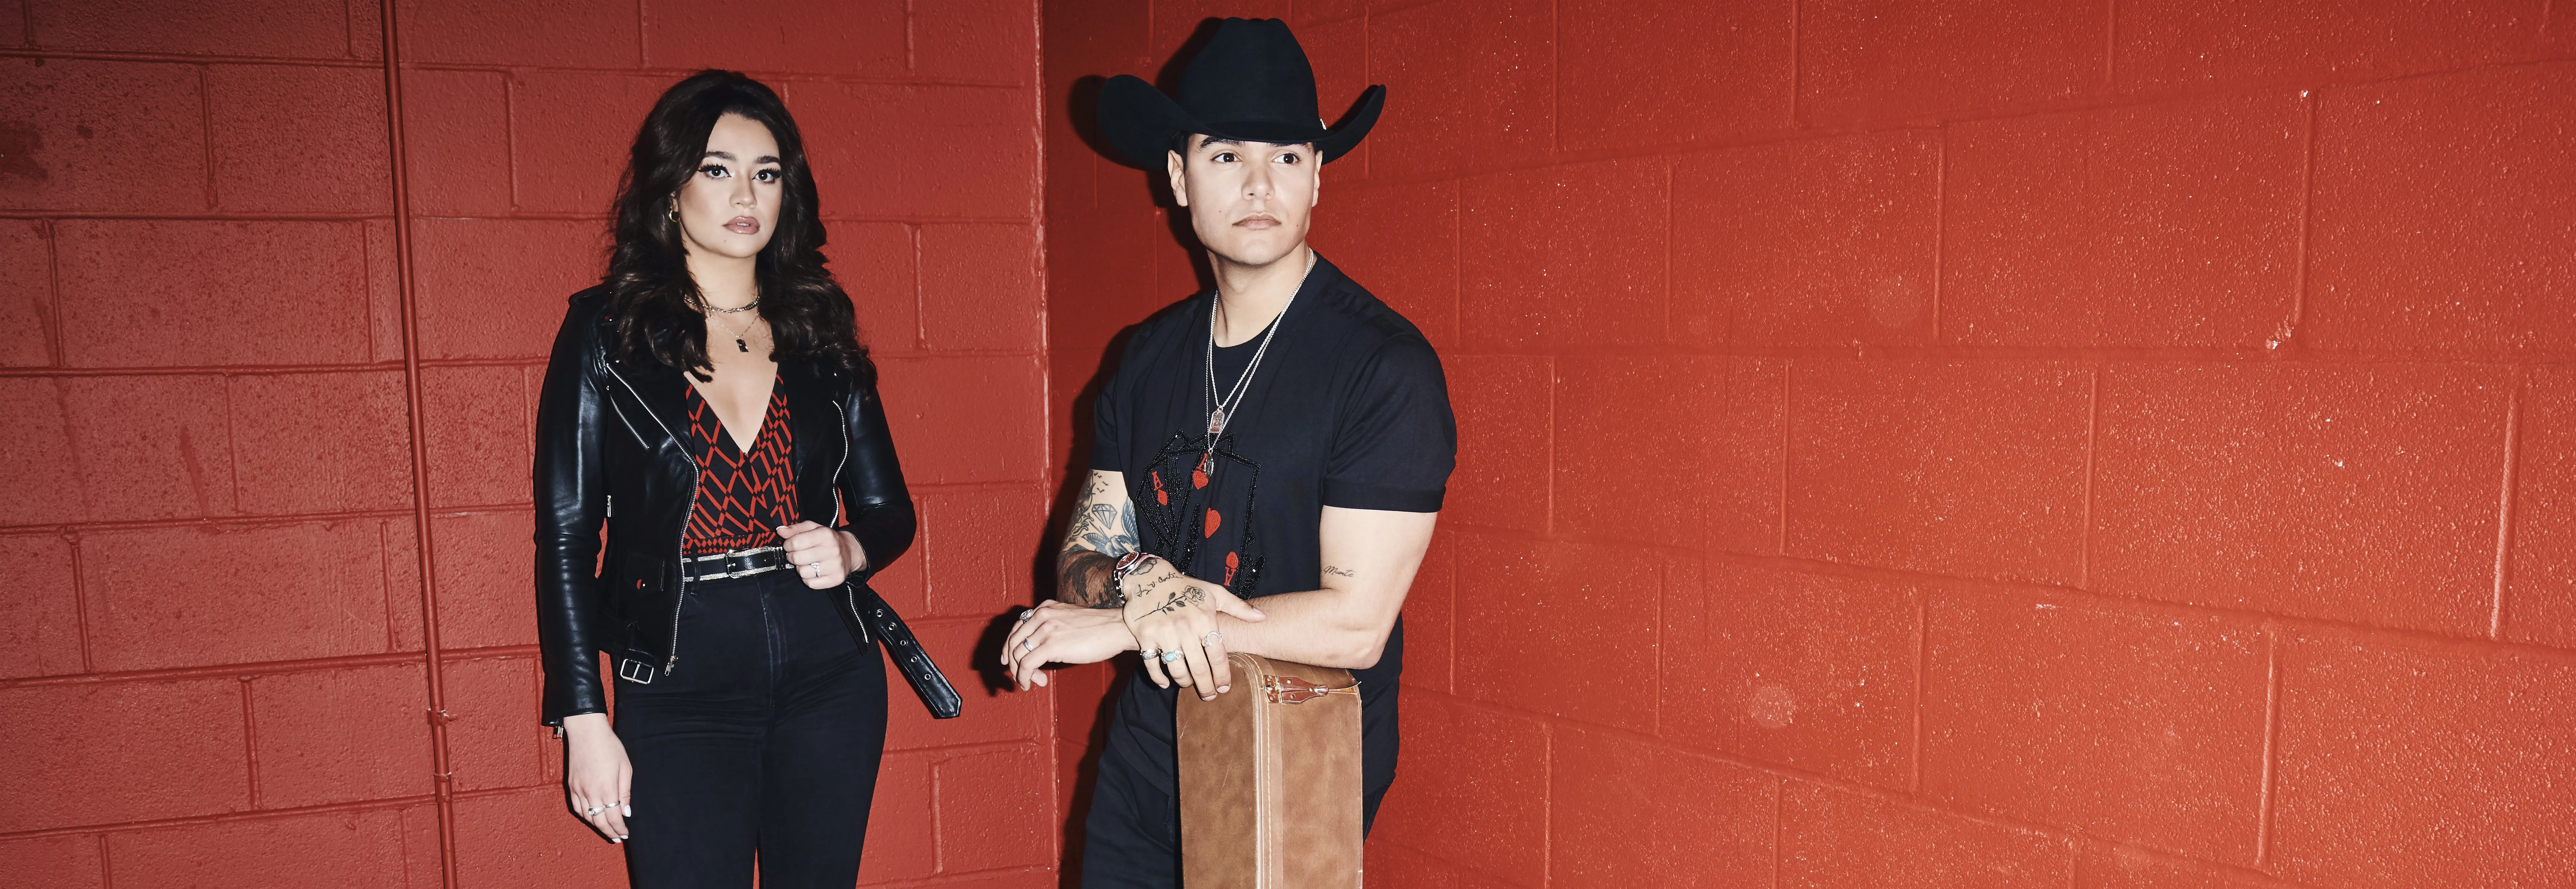 Daily Discovery: Country-Latin Duo Kat & Alex Chase Their Dreams On New Single, “Heartbreak Tour”